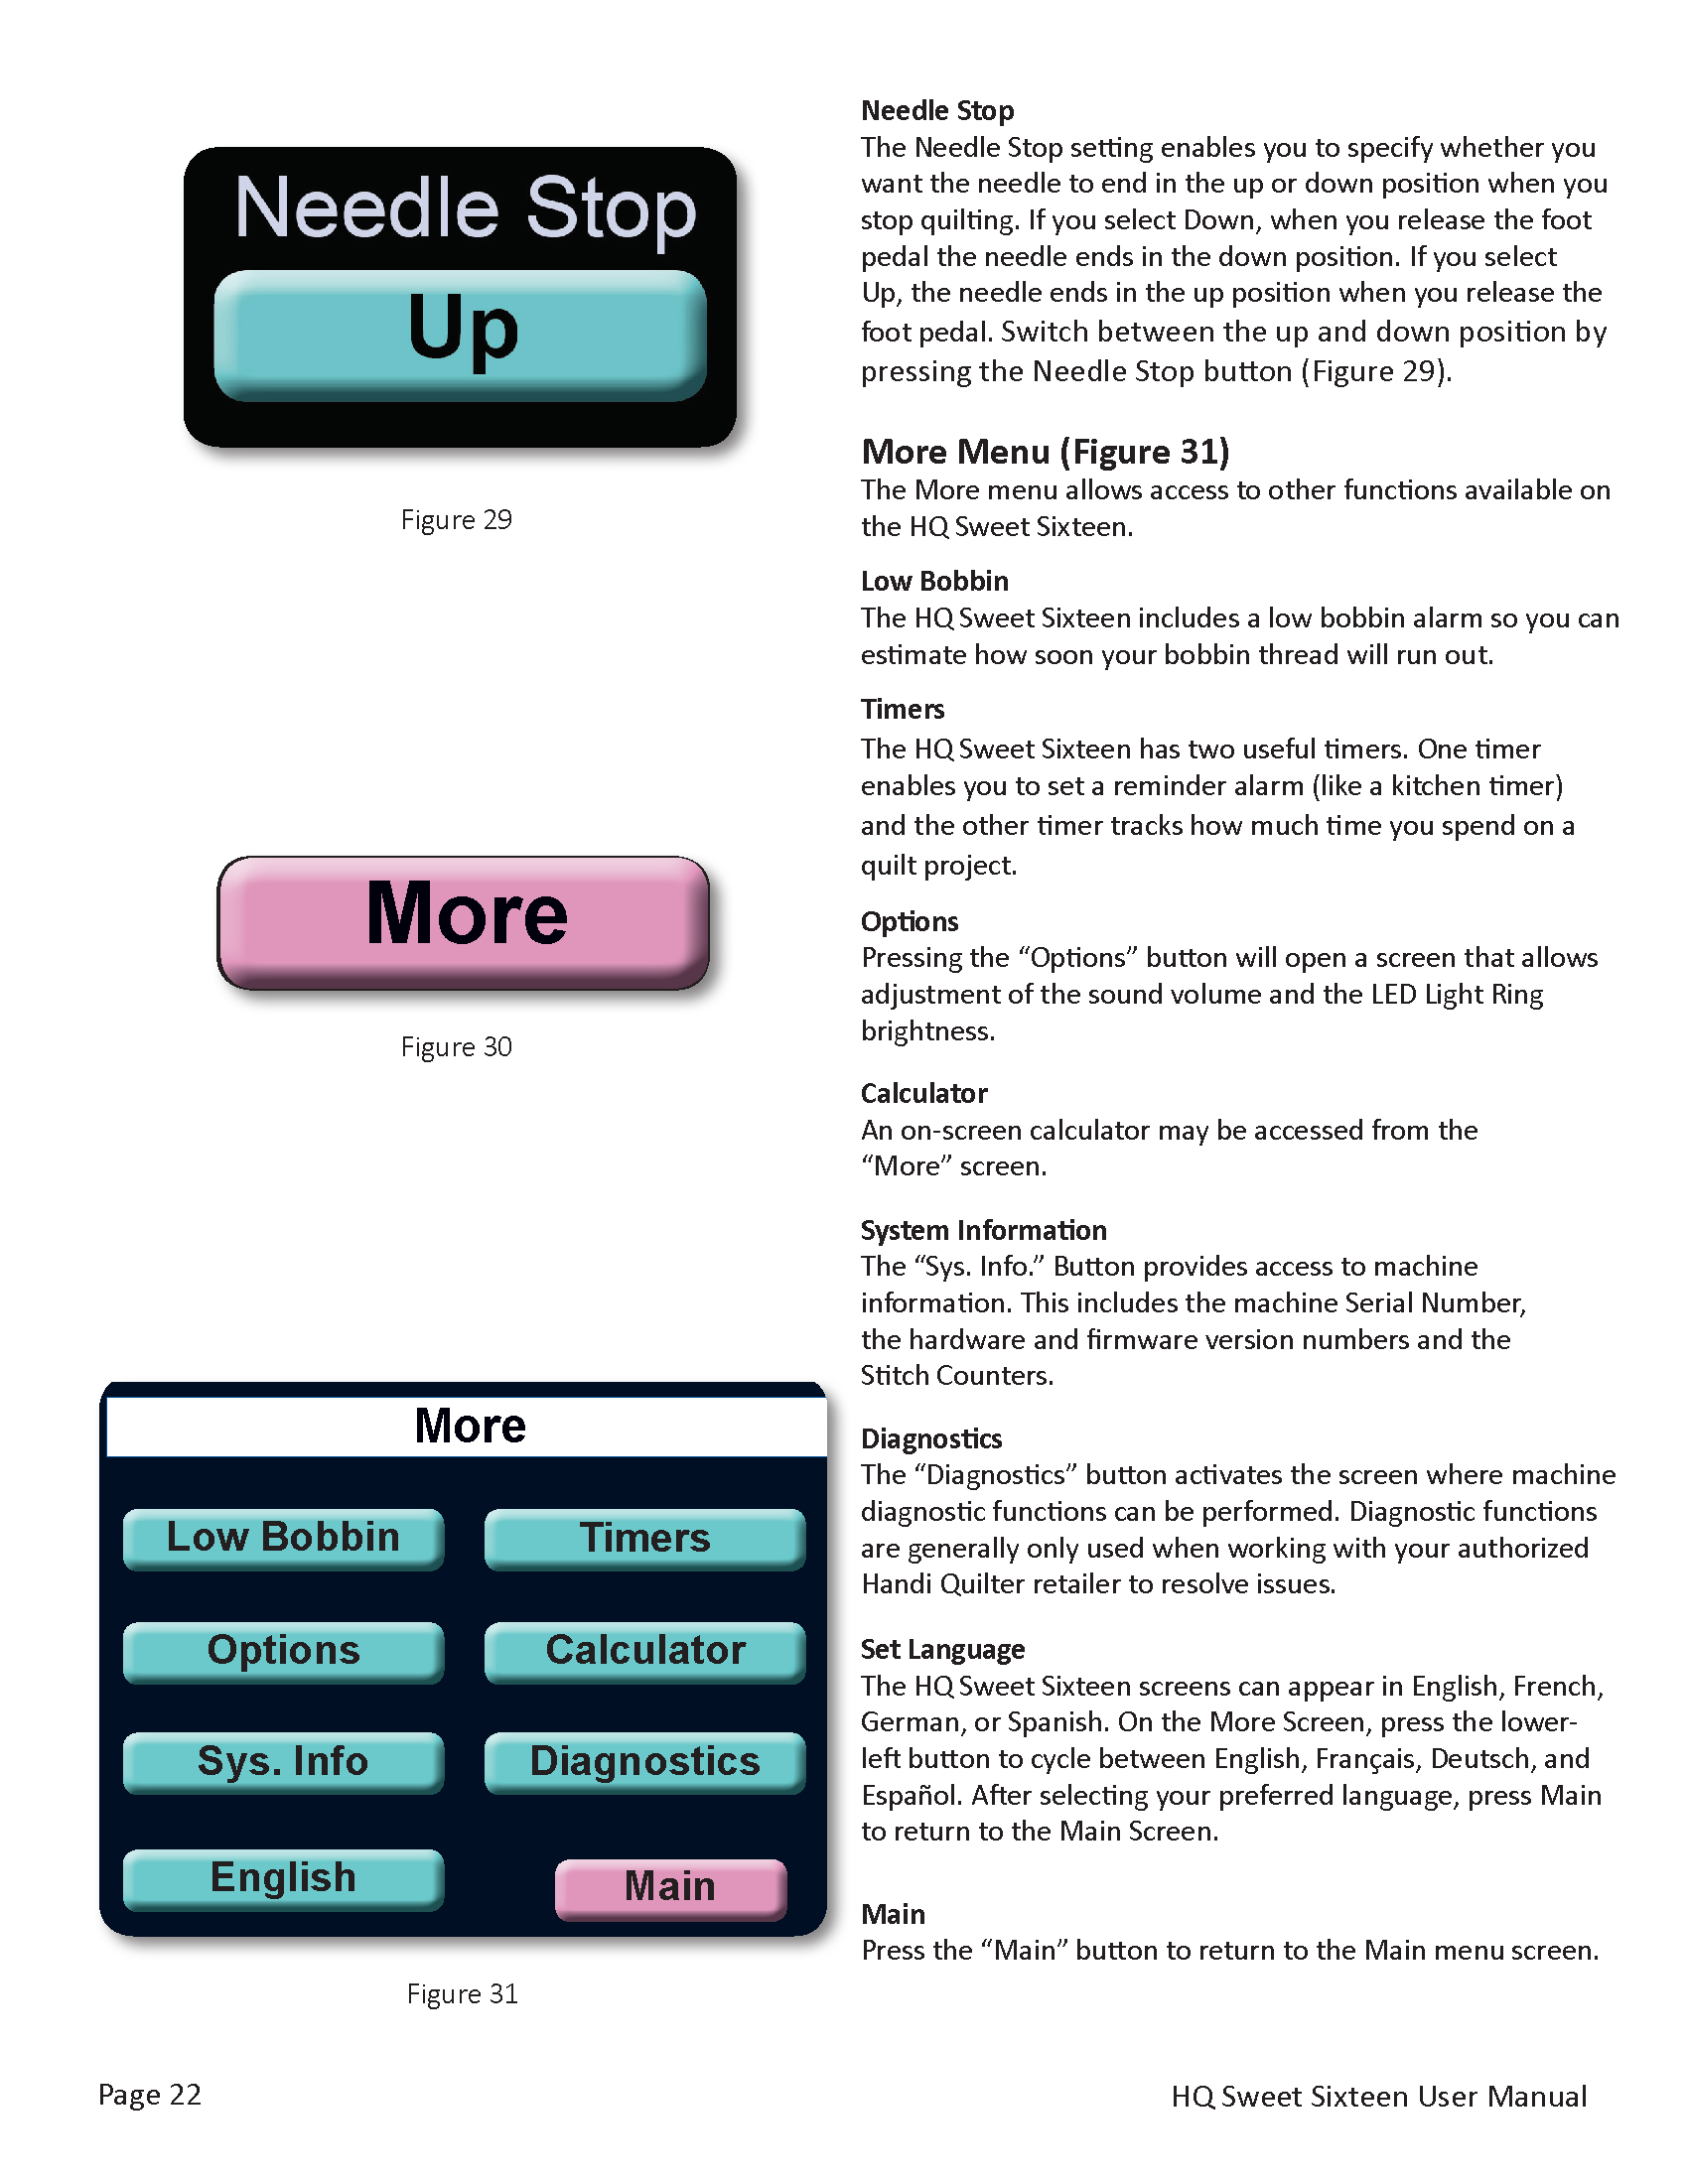 HQ-Sweet-Sixteen-User-Manual-V3.1_Page_23.png